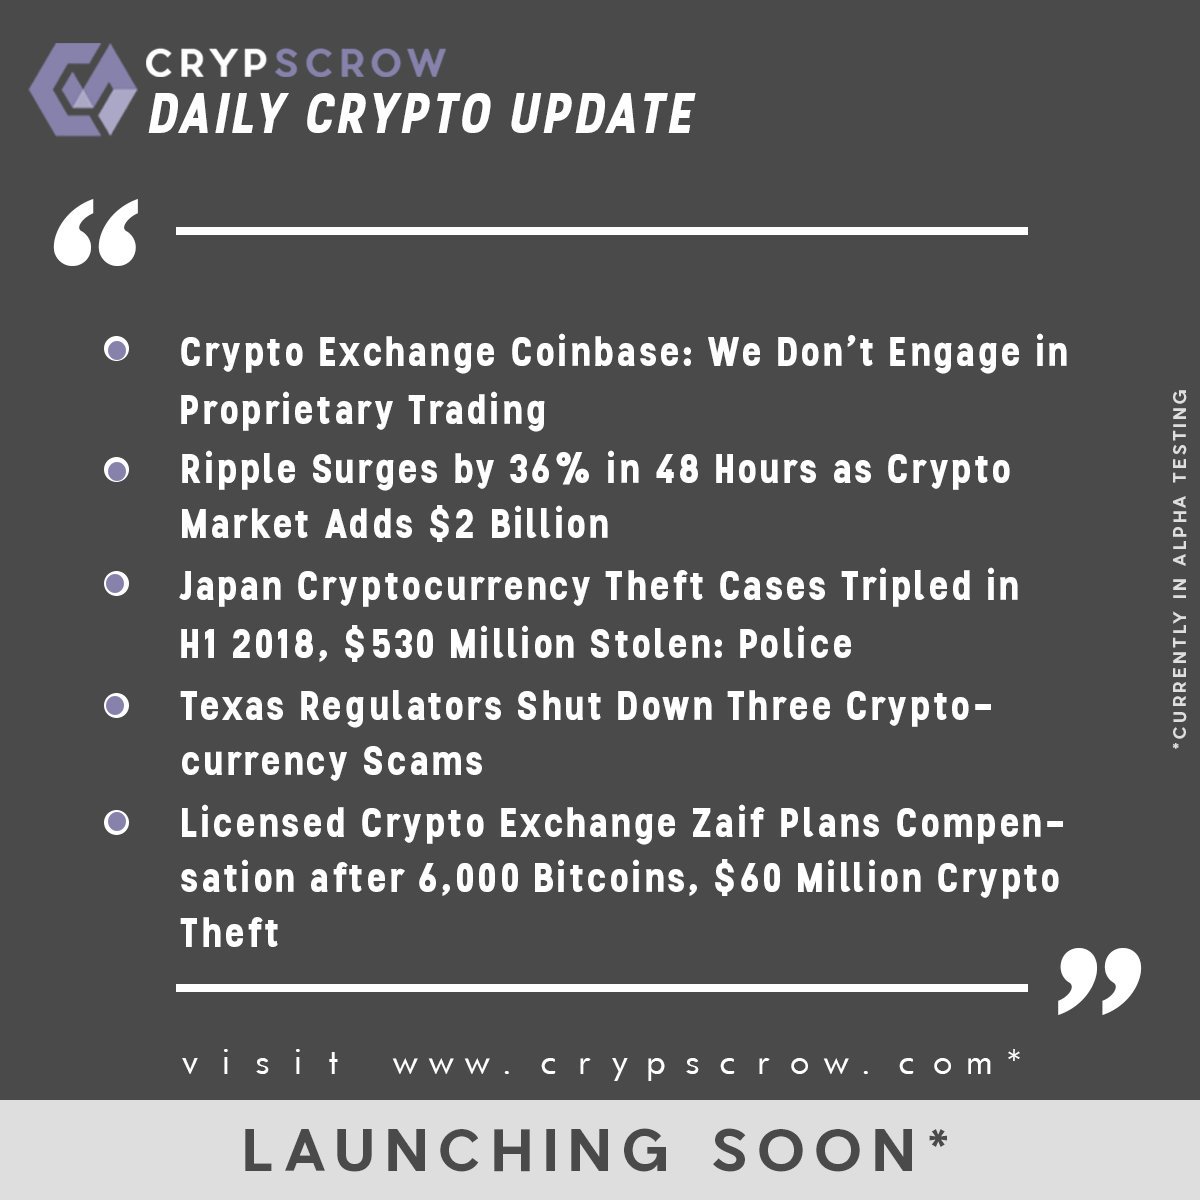 #dailycryptoupdate #cryptonews #cryptoexchange #coinbase #proprietarytrading #ripple #surge #japan #cryptotheft #tripled #texas #regulator #shuts #scam #currency #zaif #compensation #crypscrow visit crypscrow.com